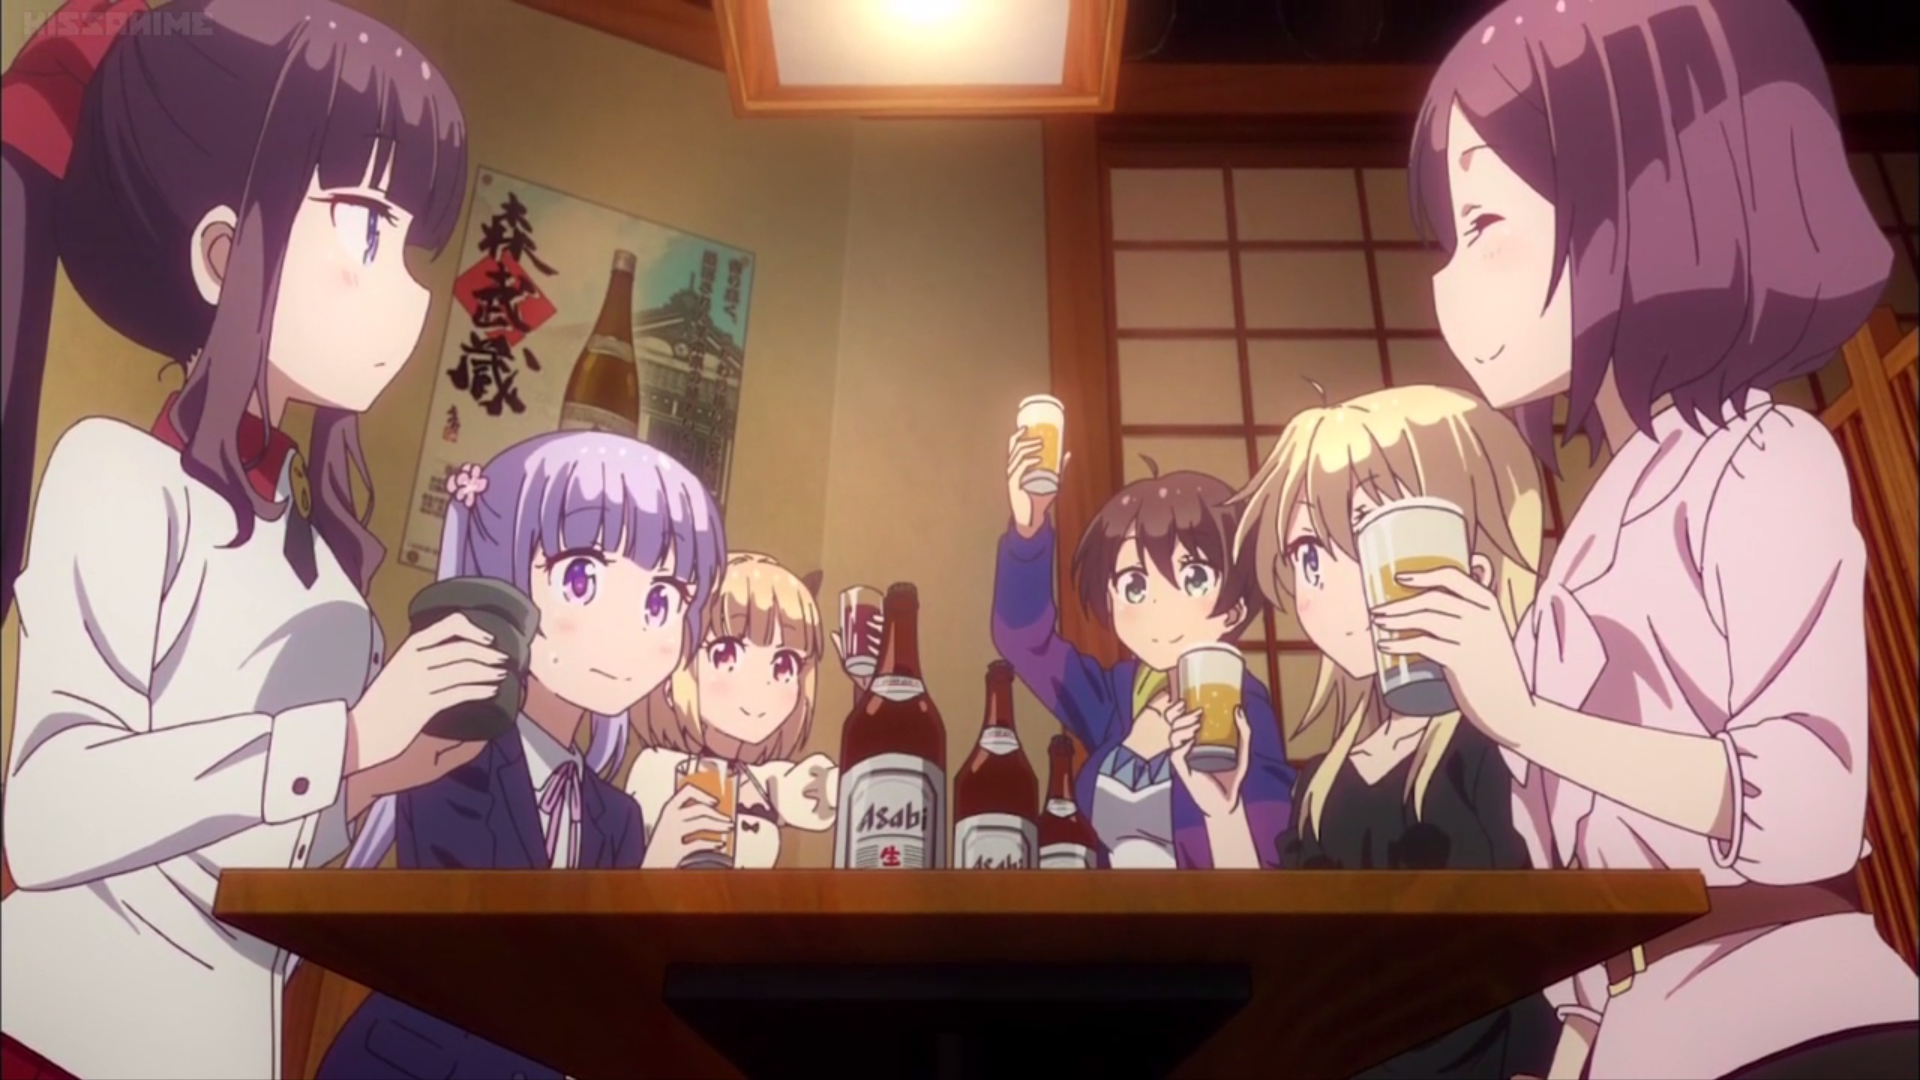 1378200 Anime Girls, Anime, Drinking, Cat - Rare Gallery HD Wallpapers